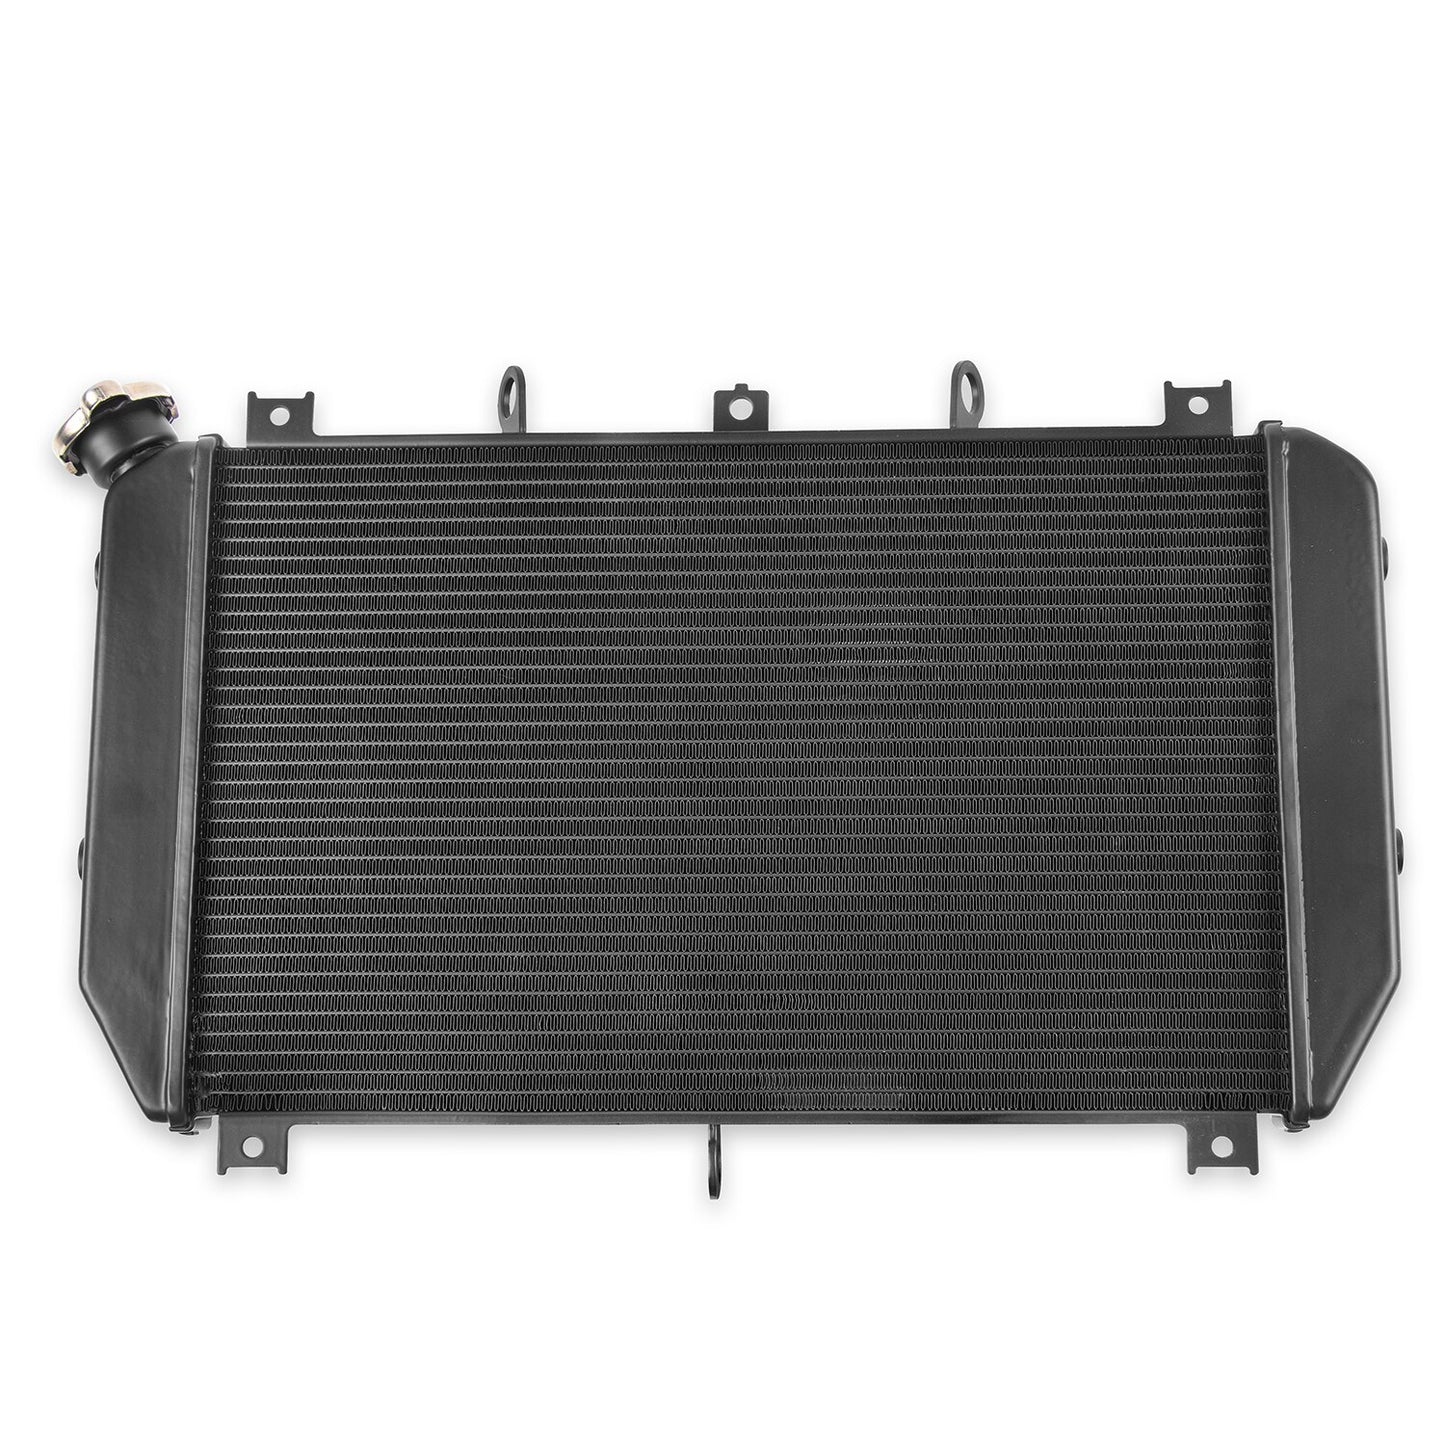 Wolfline Z900RS Engine Radiator Cooler Cooling System For Kawasaki Z900 RS 2018 2019 2020 2021 2022 2023 Aluminum Motorcycle Accessories